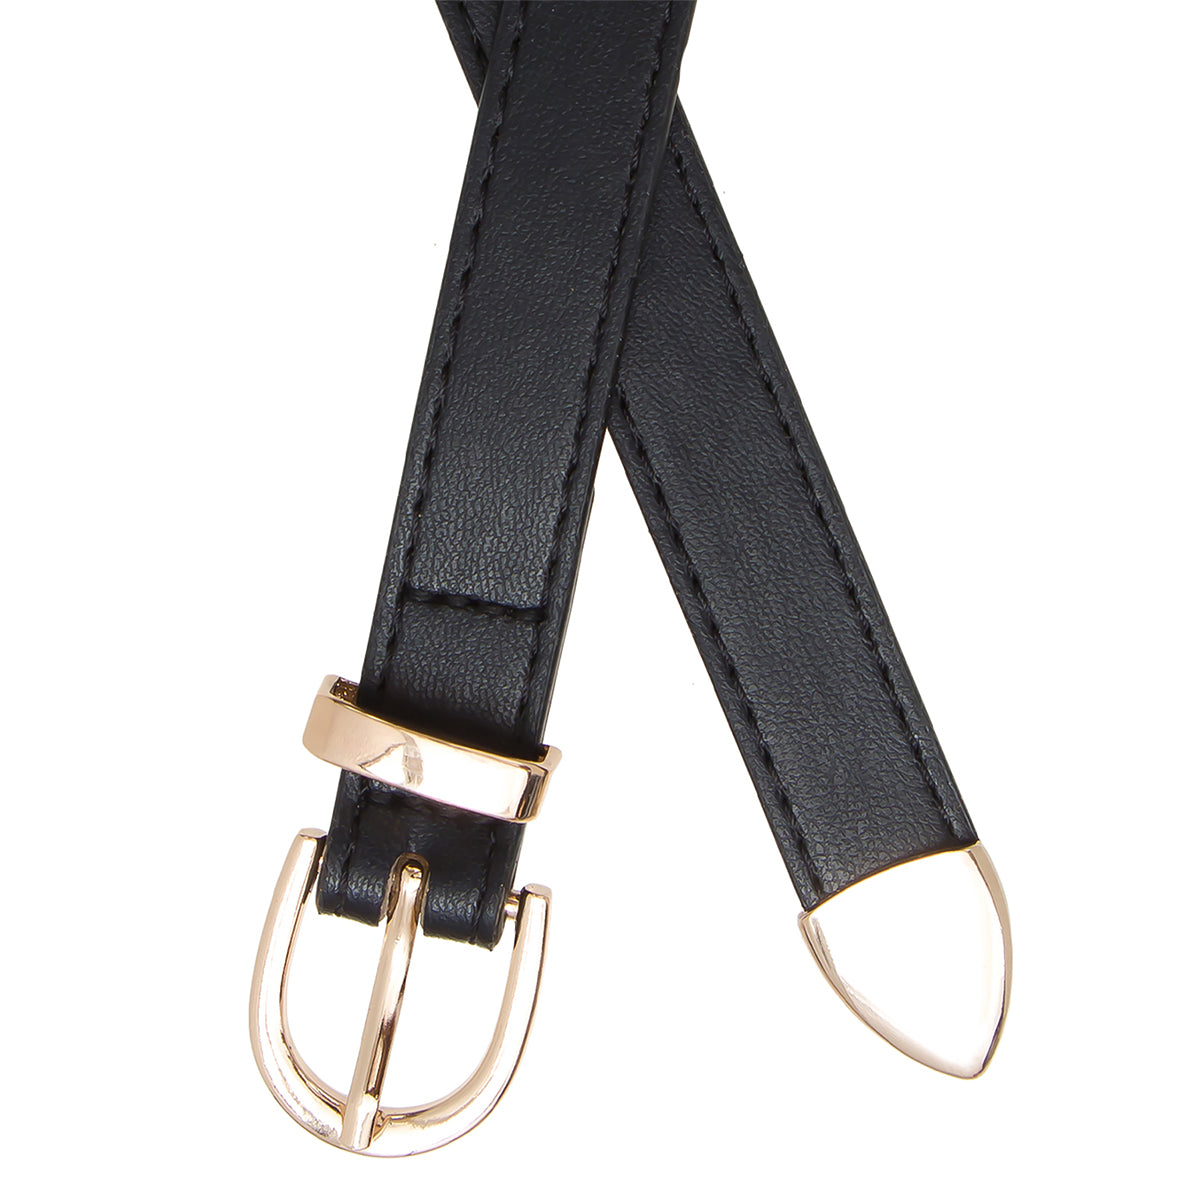 Black With Gold Tone Thin Belt